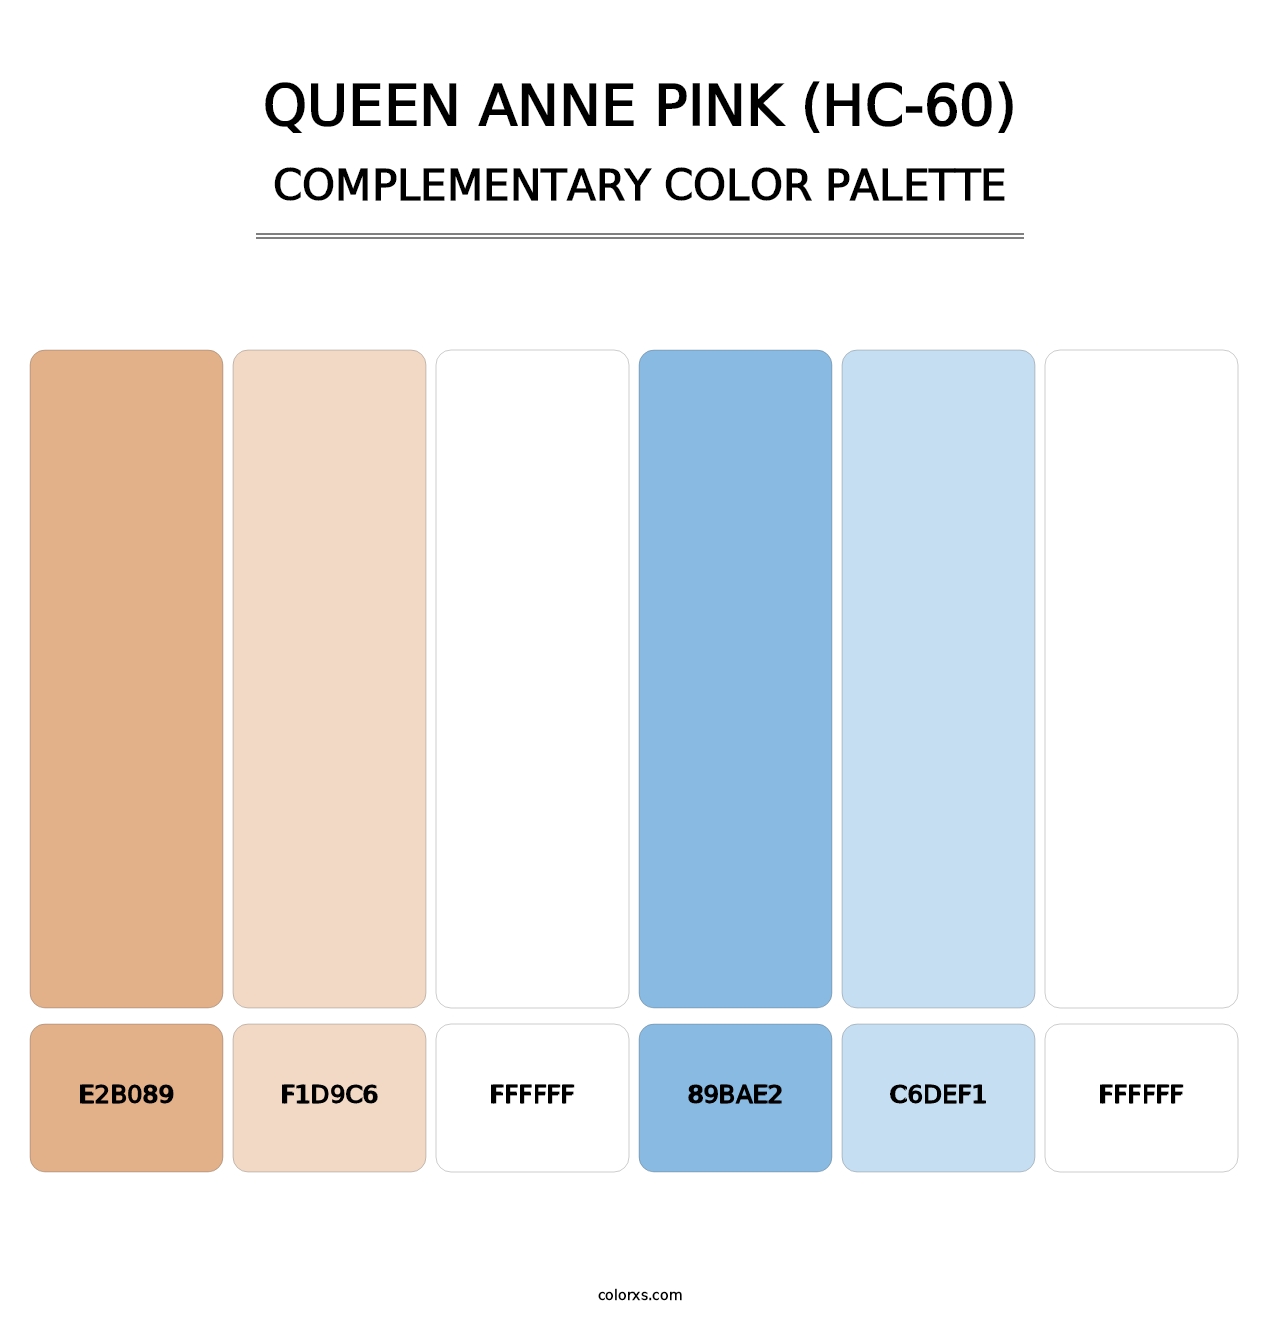 Queen Anne Pink (HC-60) - Complementary Color Palette